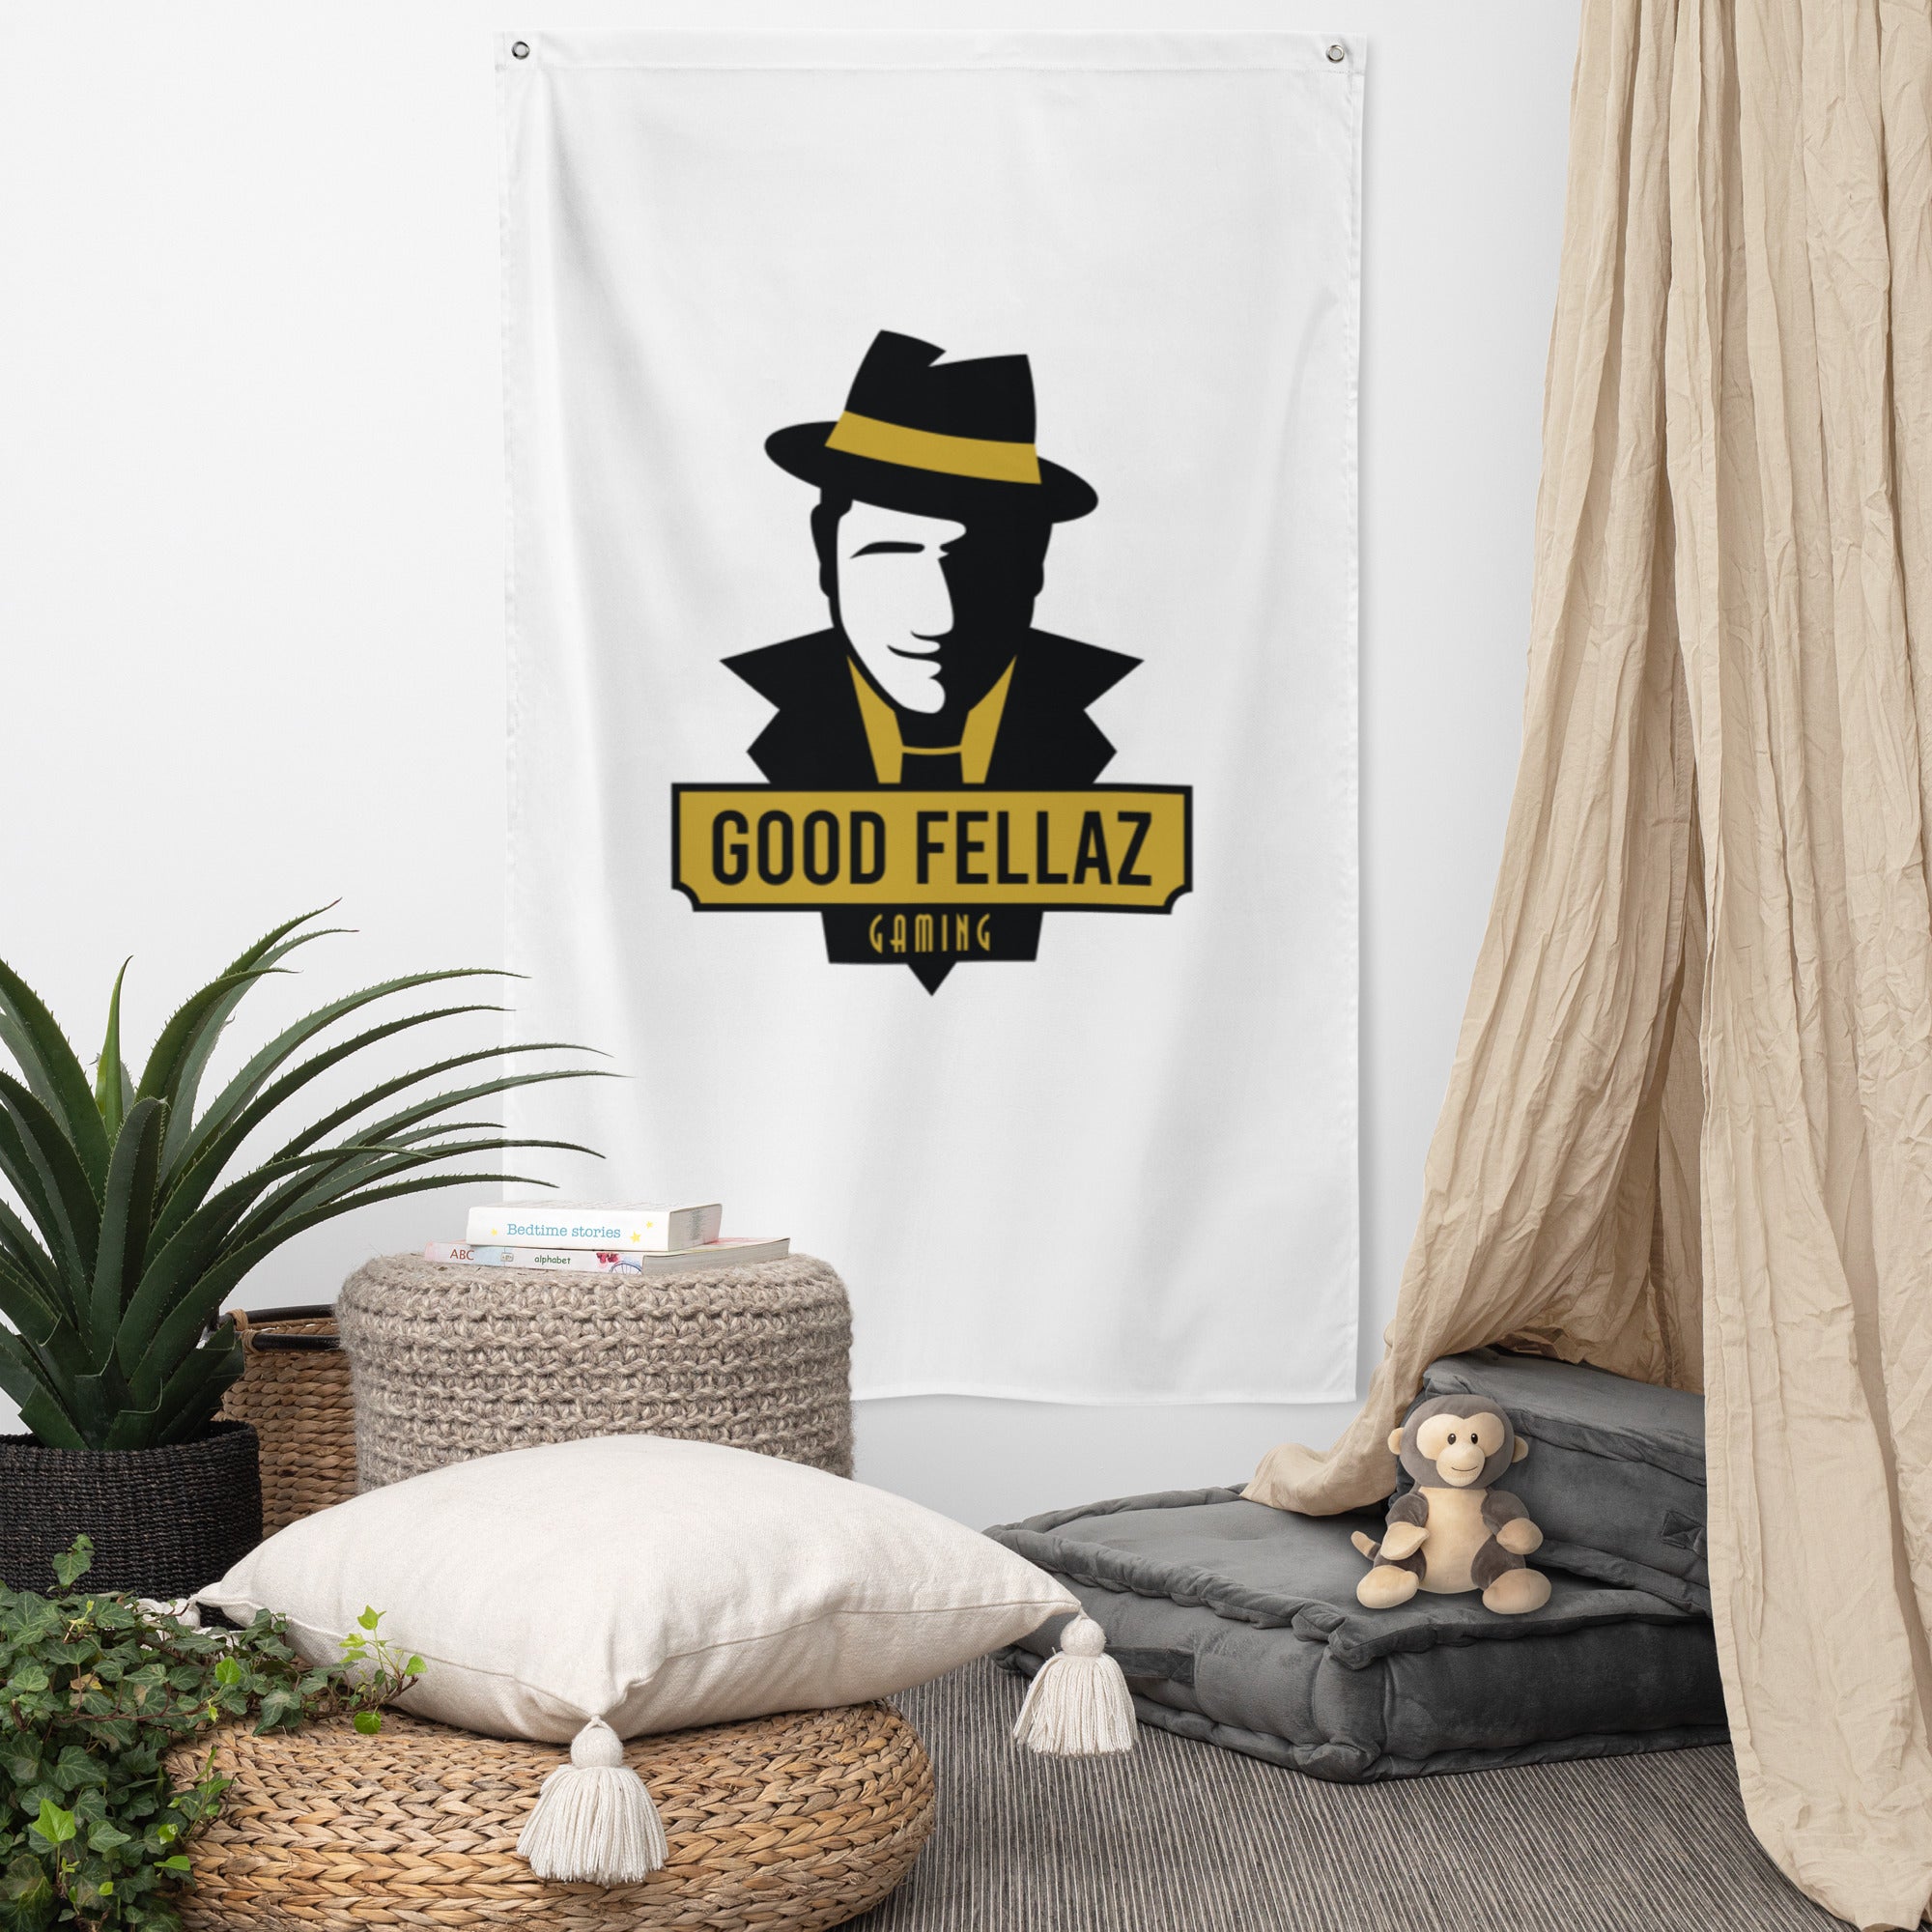 gf large vertical wall flag